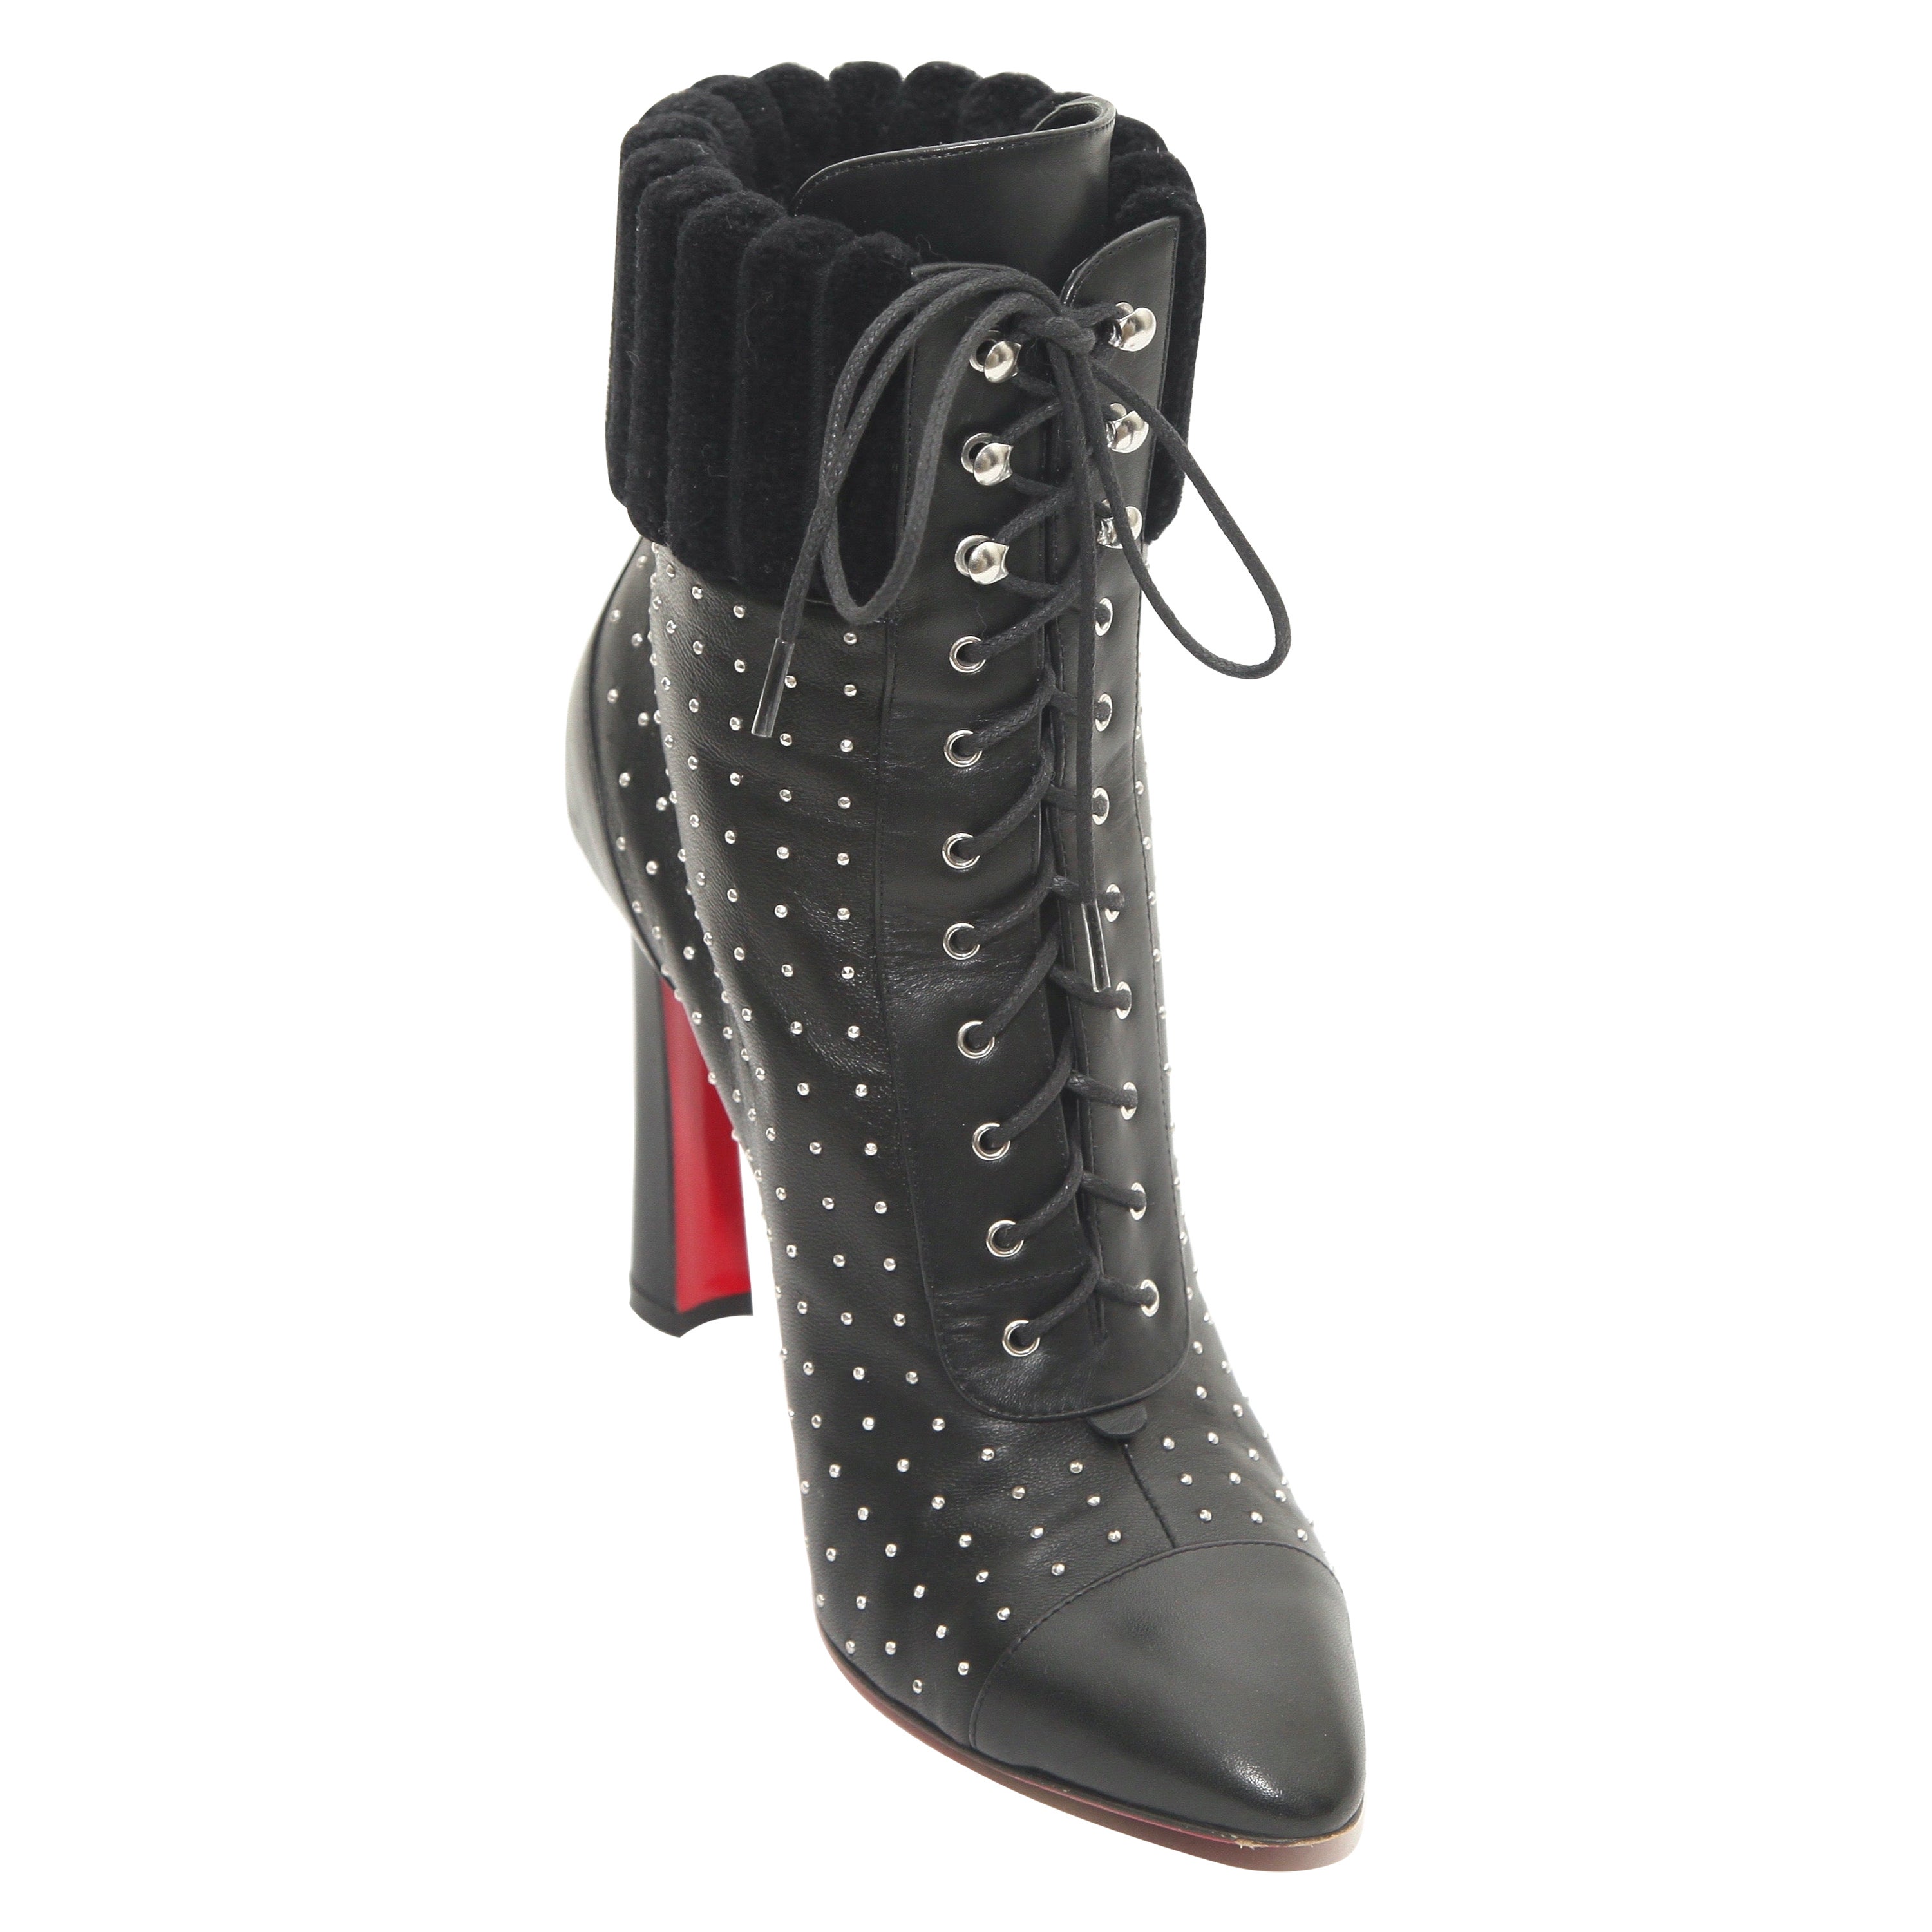 Christian Louboutin - Authenticated Boots - Patent Leather Black Plain for Men, Very Good Condition